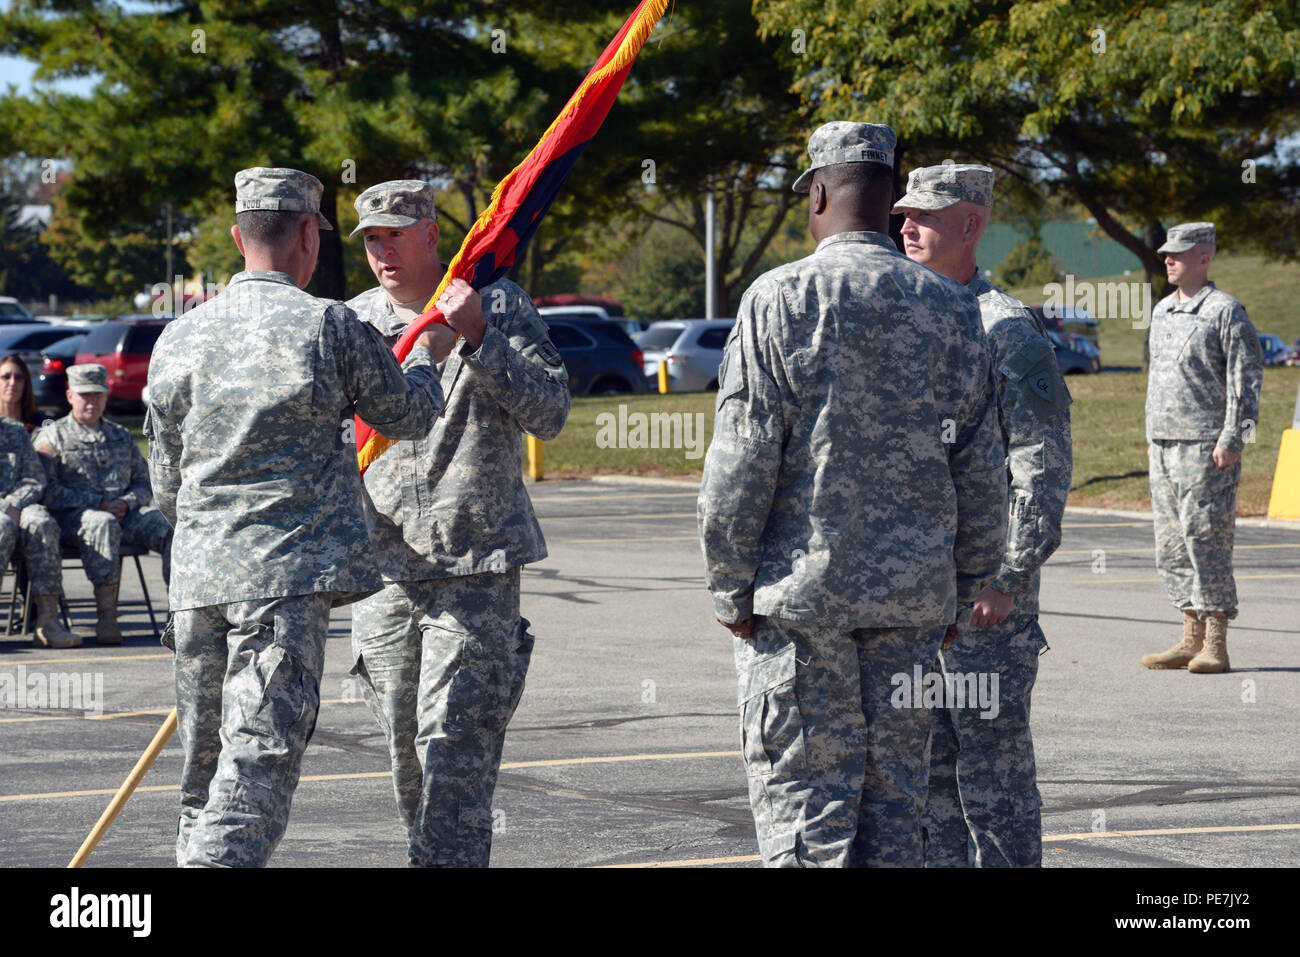 Indiana Army National Guard Lt. Col. David Skalon receive the colors of the 38th Infantry Division Headquarters and Headquarters Battalion from Maj. Gen. David C. Wood, the 38th ID commanding general, during the battalion’s command change ceremony, Saturday, Oct. 17, 2015. (Photo by Sgt. 1st Class Jeff Lowry) Stock Photo